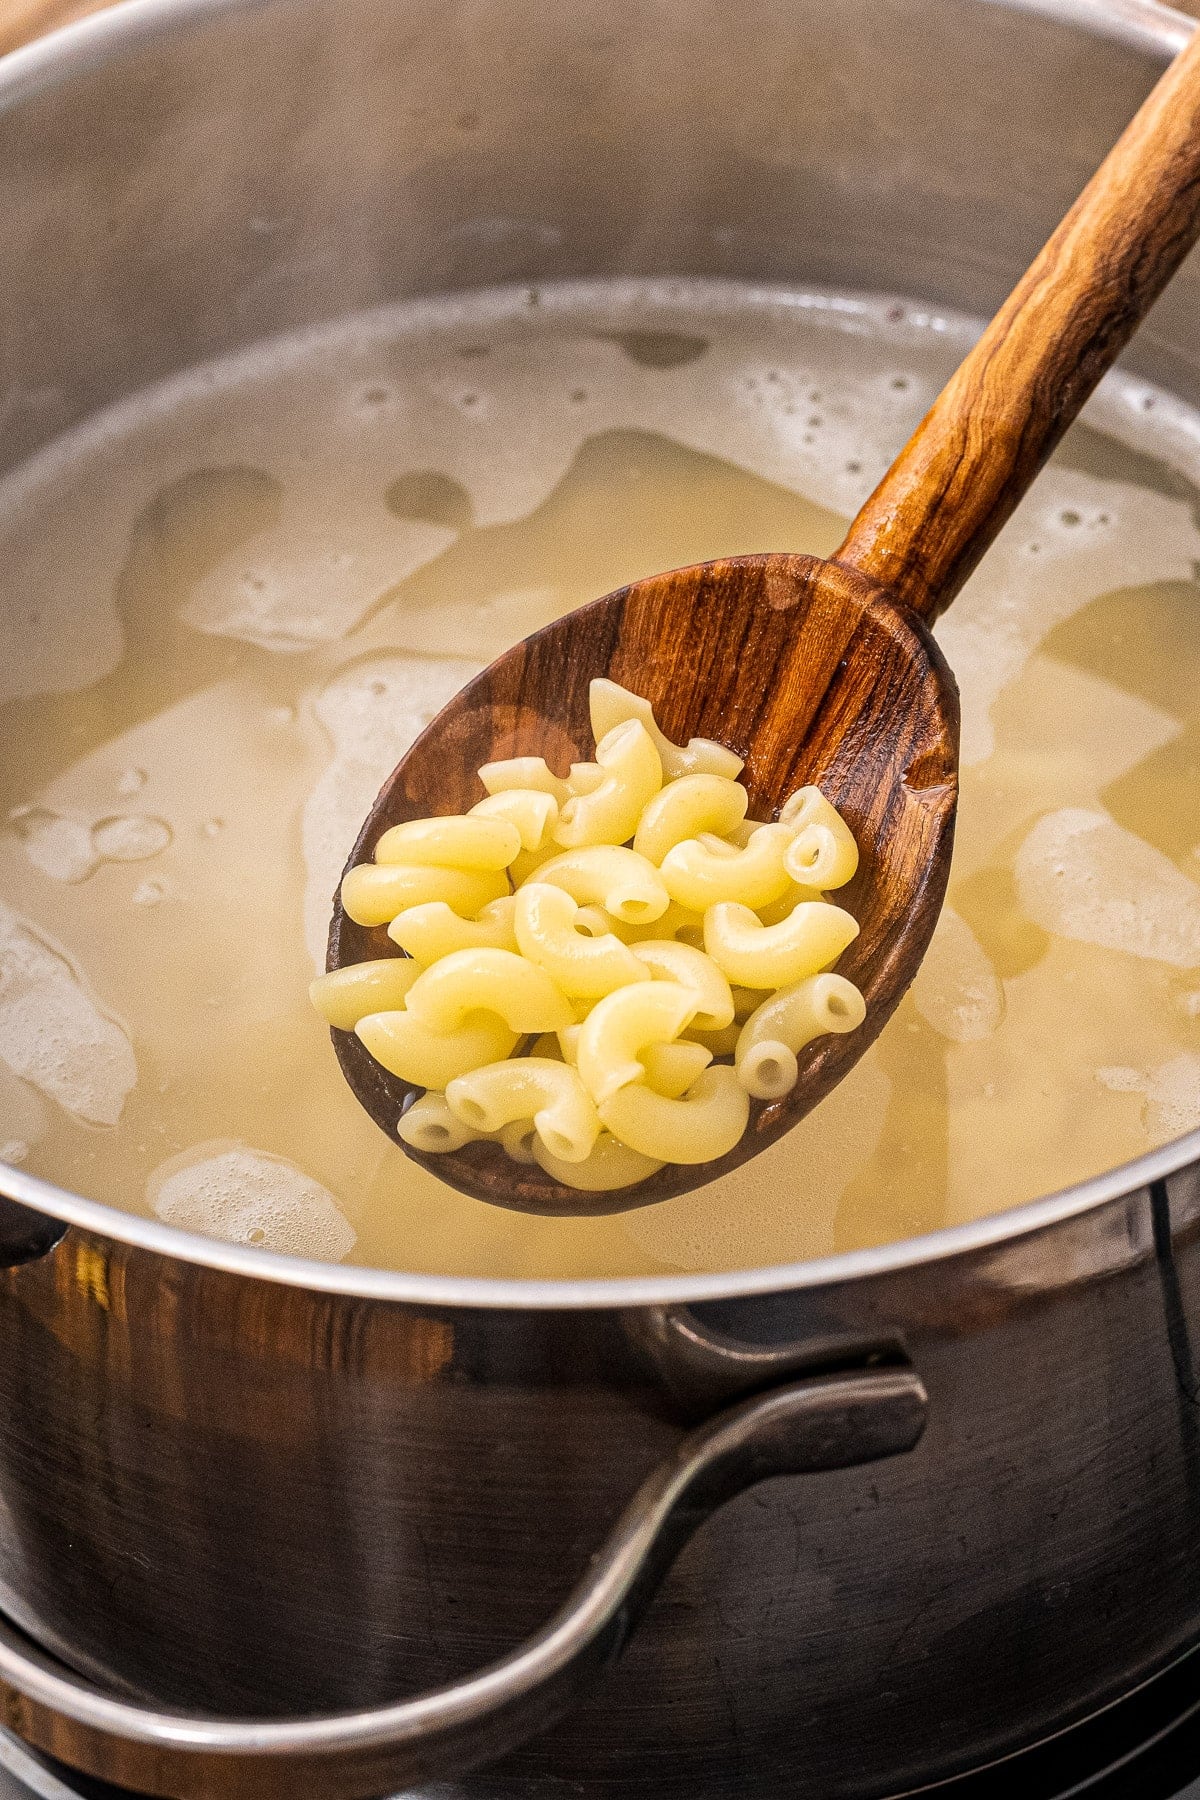 Wooden spoon with cooked macaroni noodles on it over a saucepan.